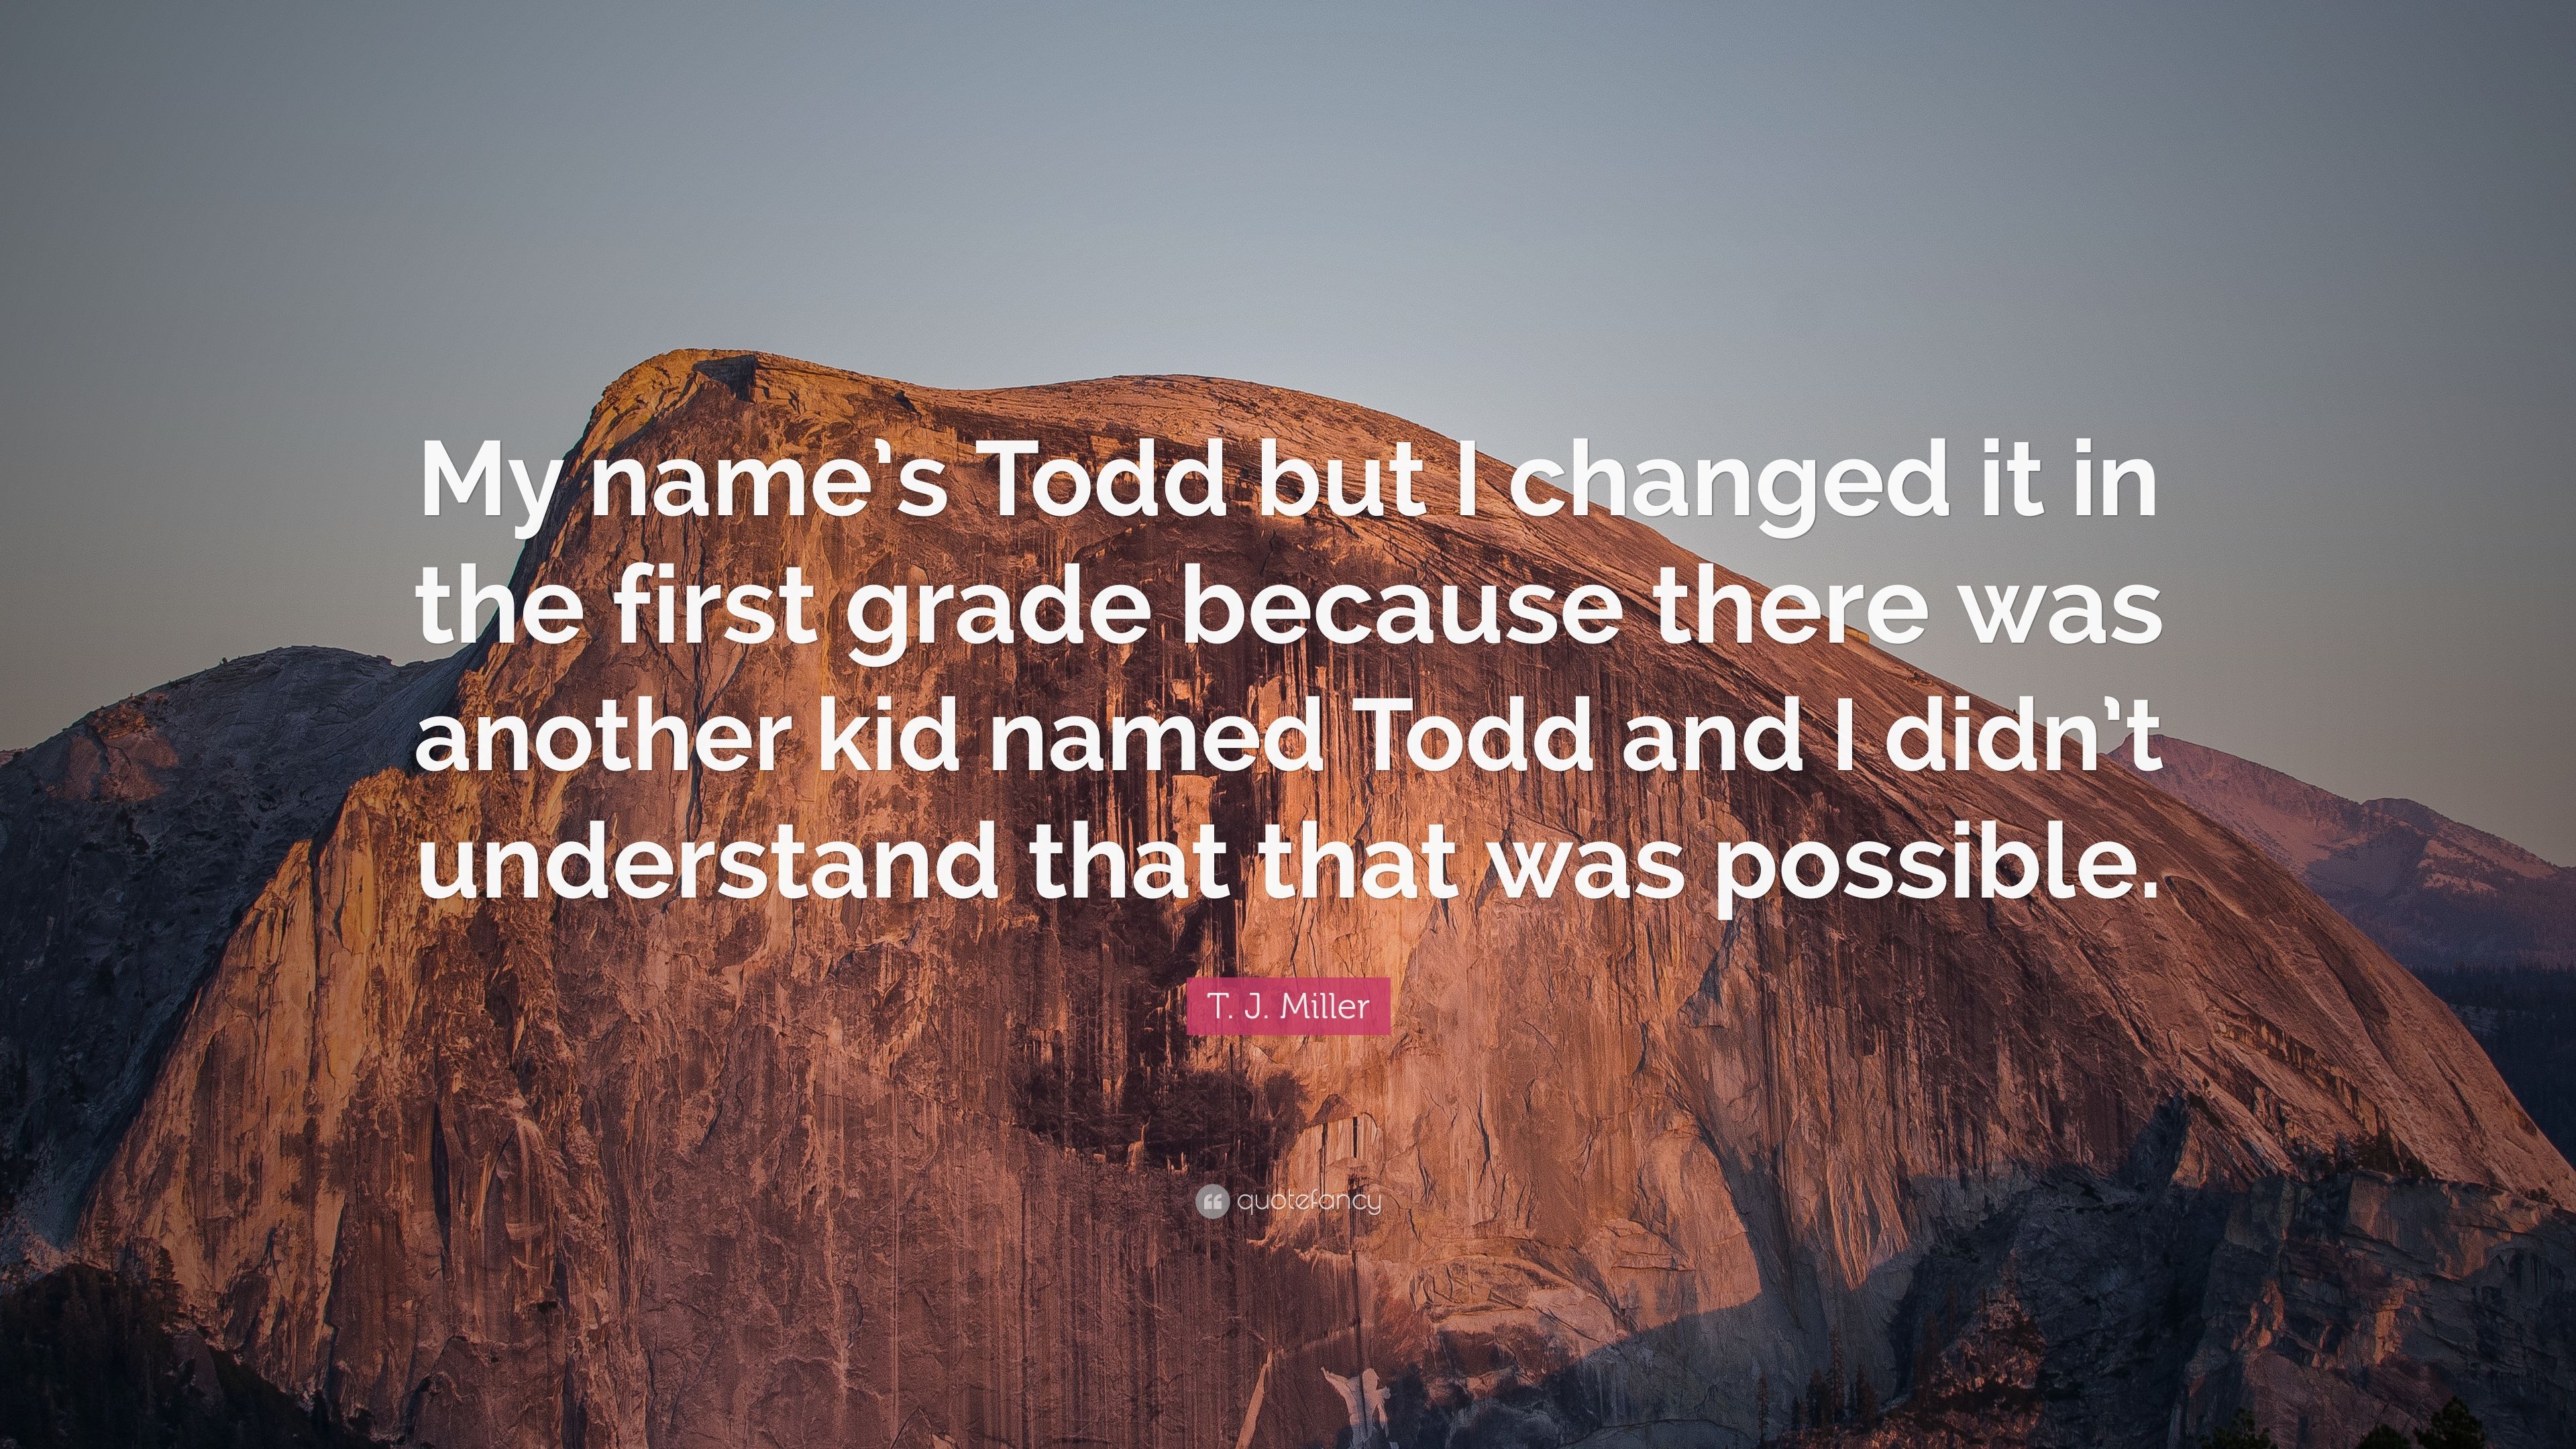 T. J. Miller Quote: “My name's Todd but I changed it in the first